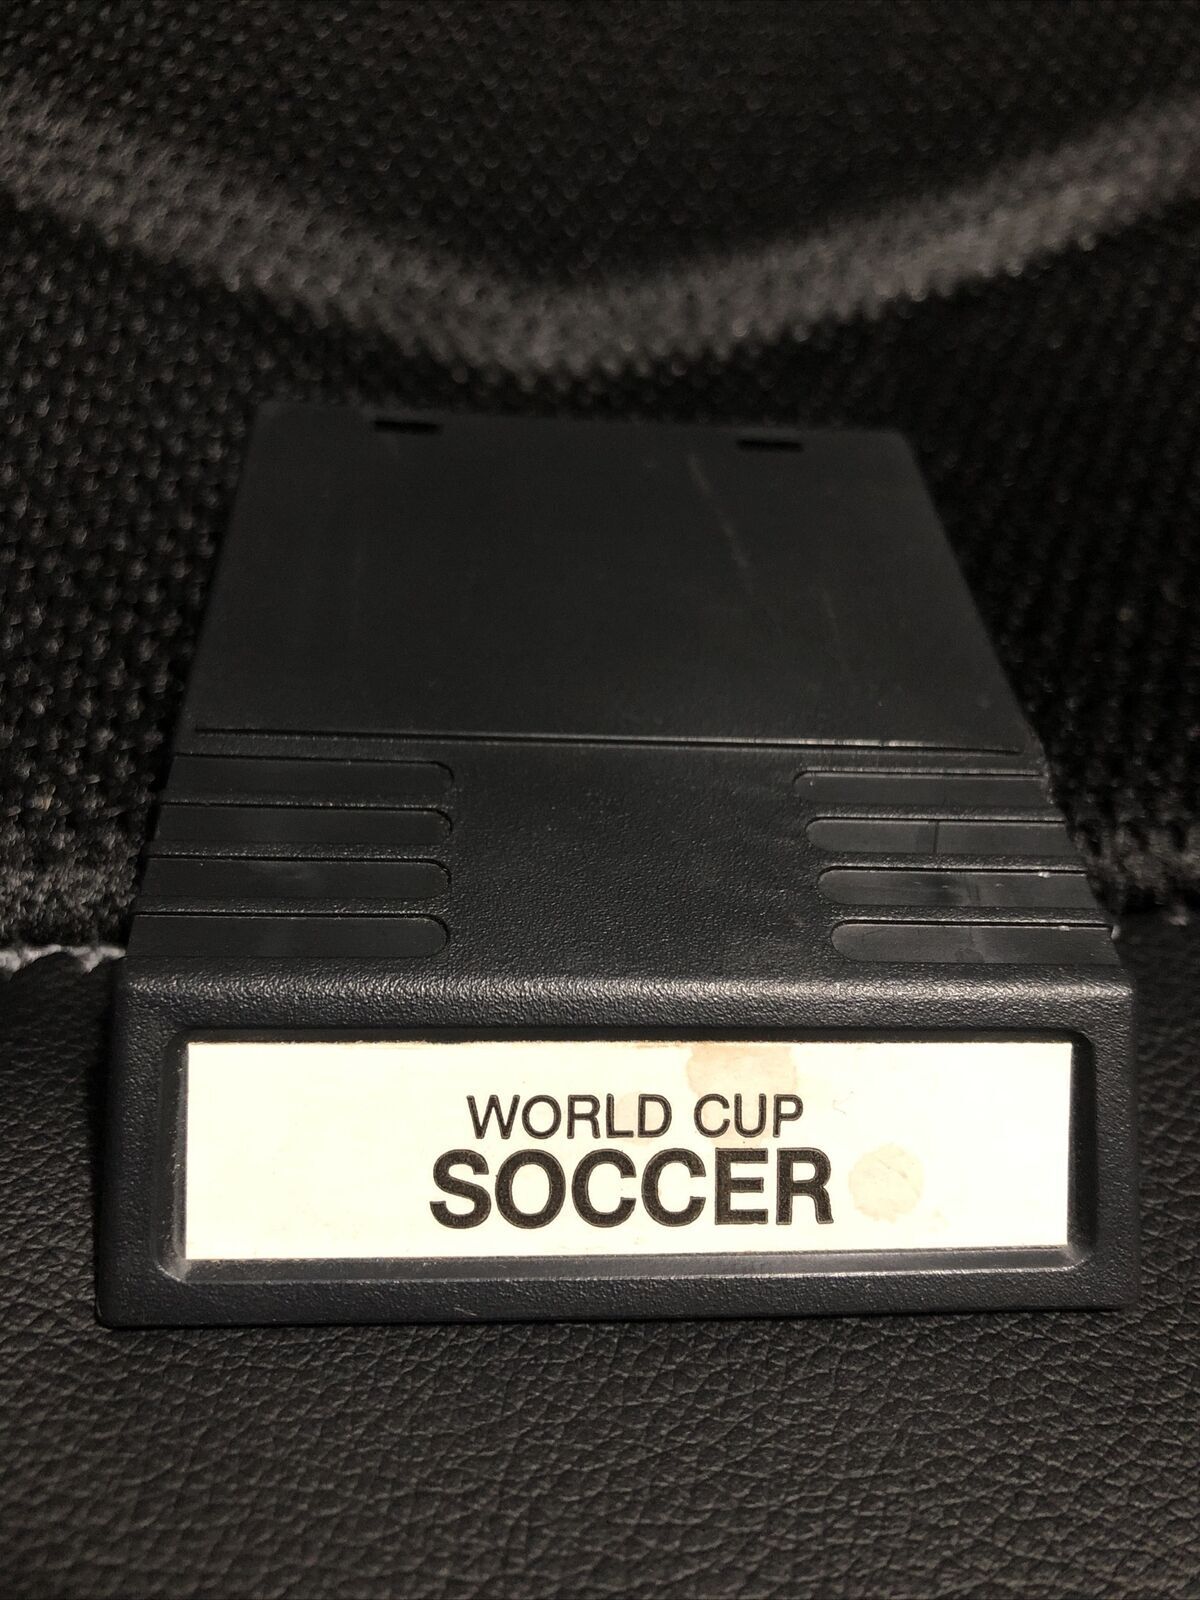 World Cup Soccer       - Intellivision  - Cart 